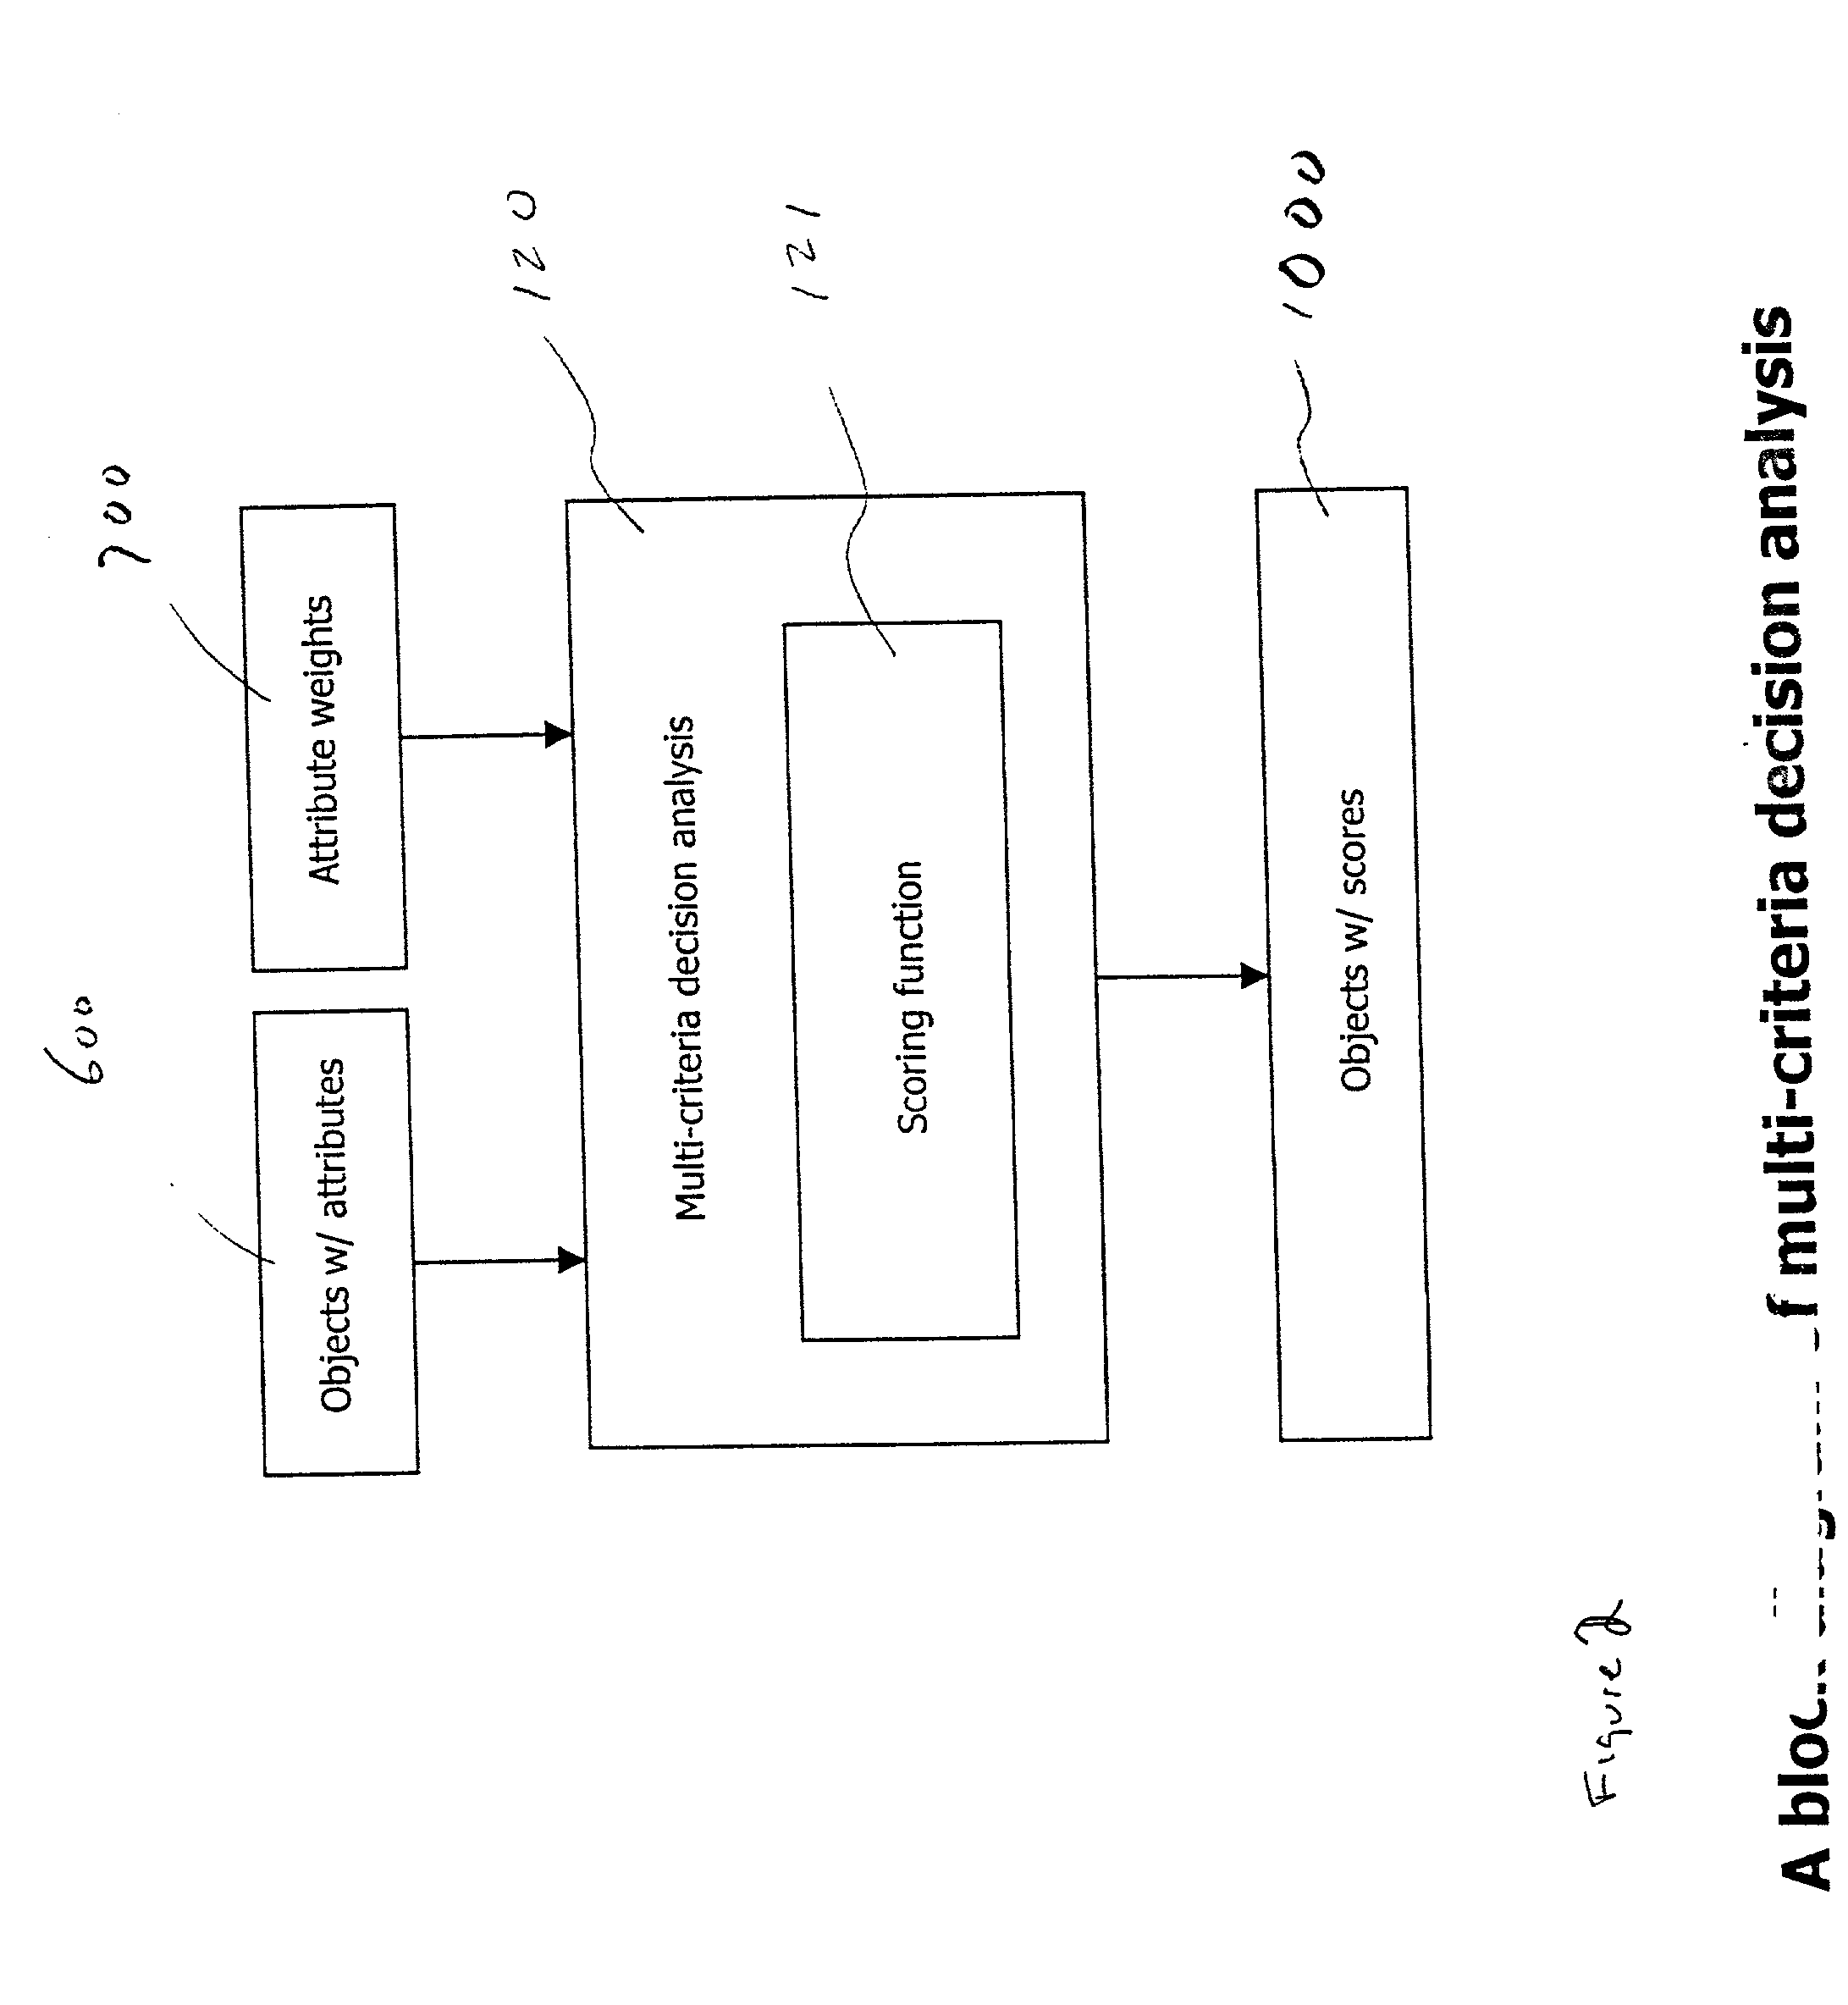 System and method for ranking objects having multiple attributes